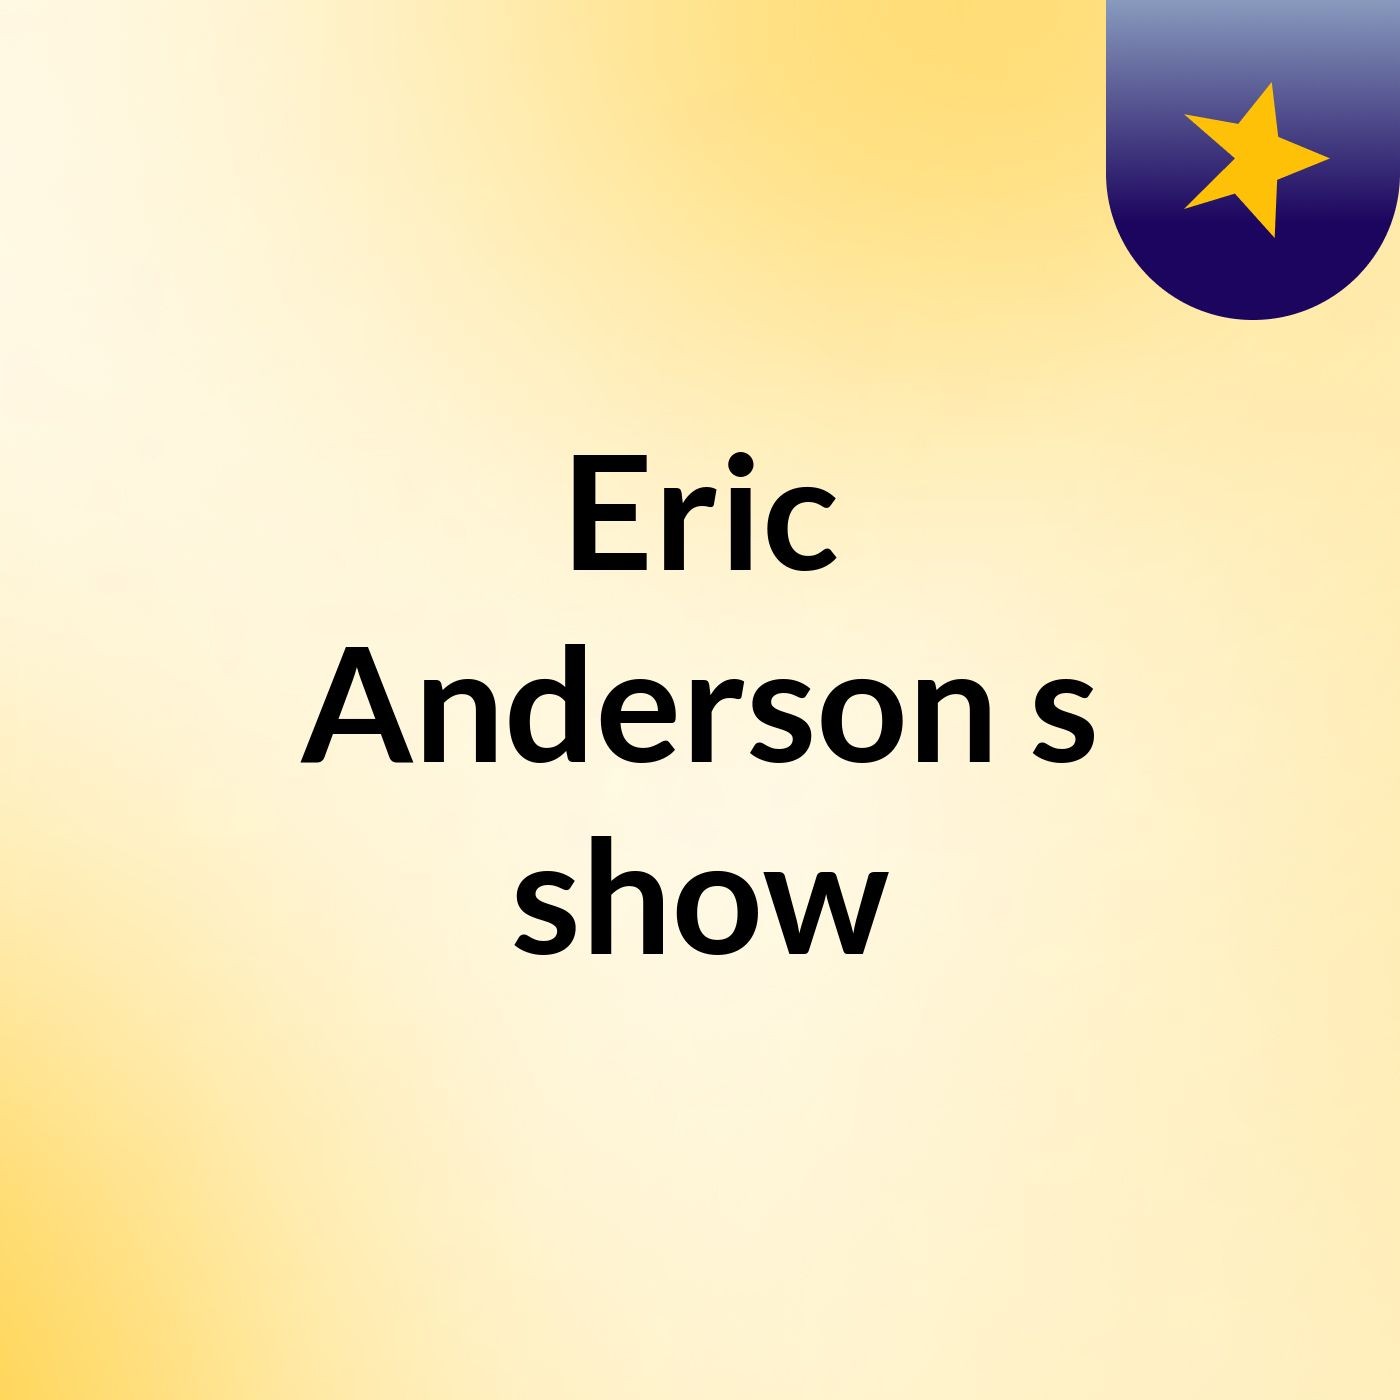 Eric Anderson's show